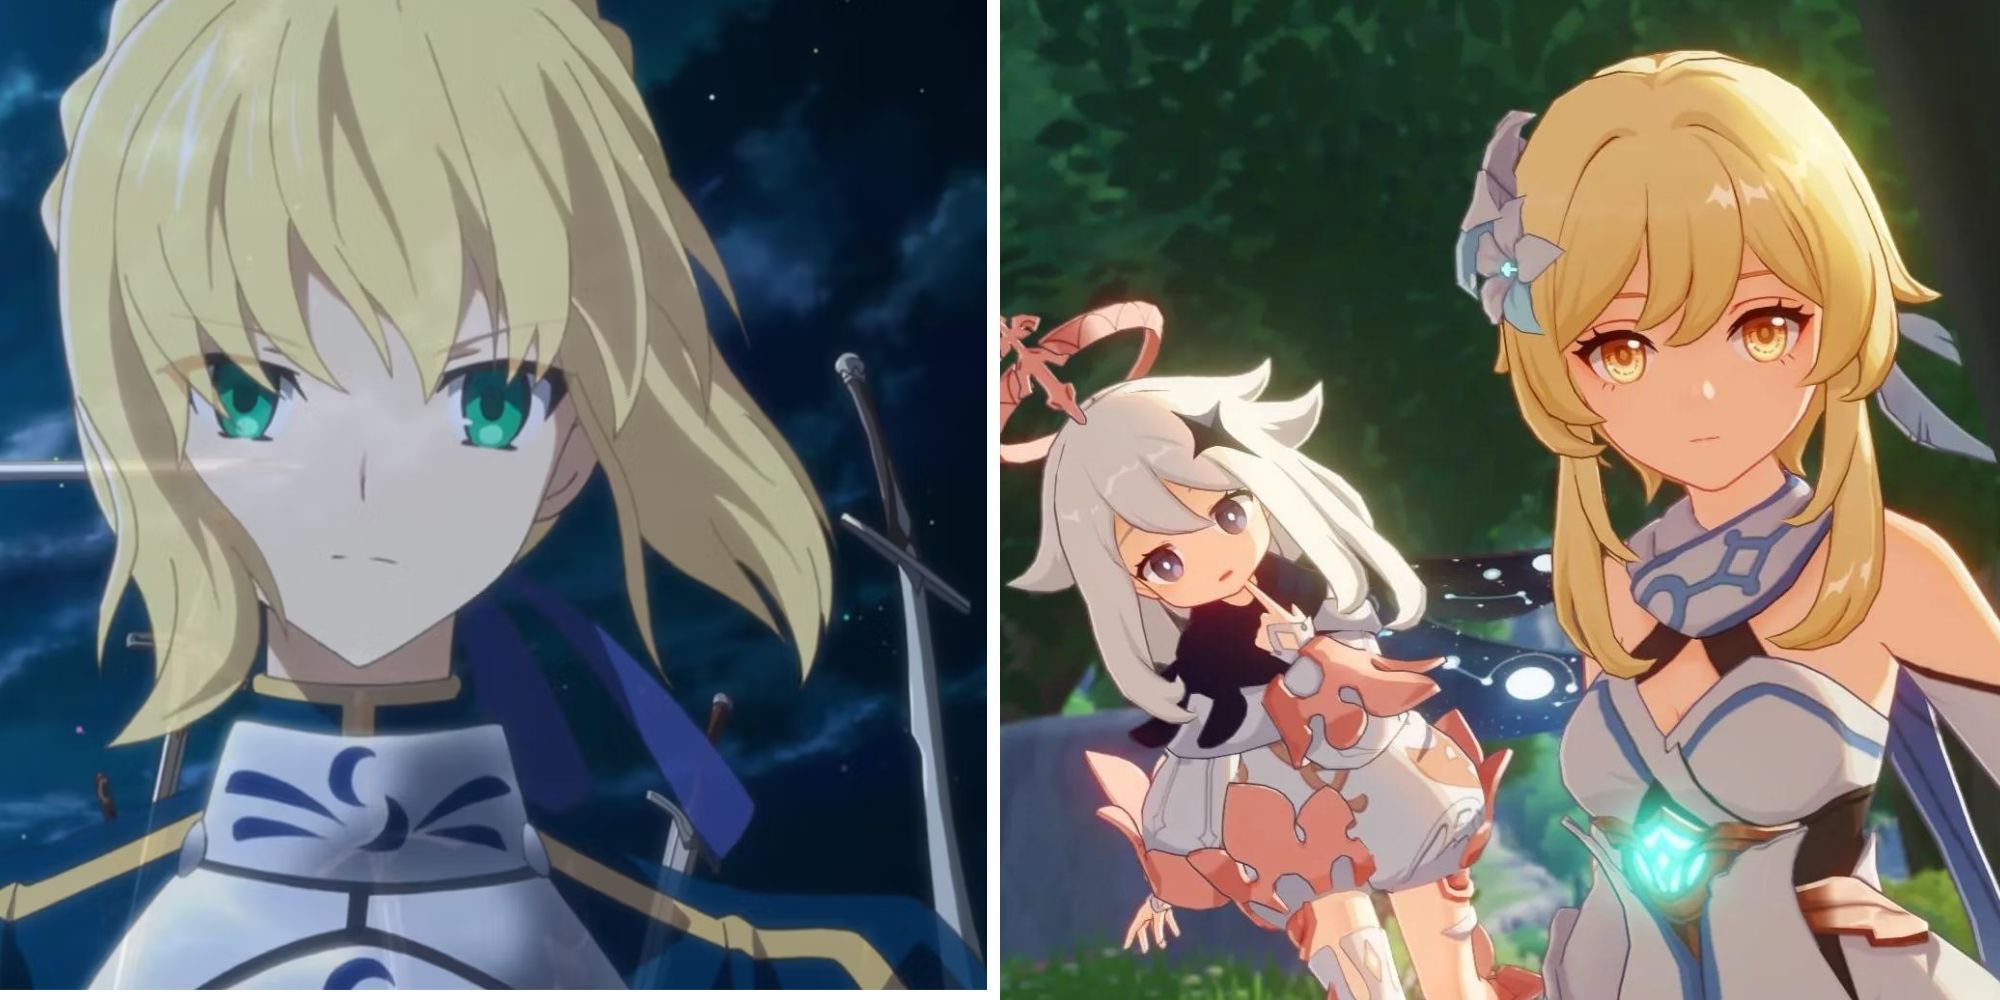 Most Expensive Gacha Games featuring Fate: Grand Order Saber and Genshin Impact's Lumine and Paimon